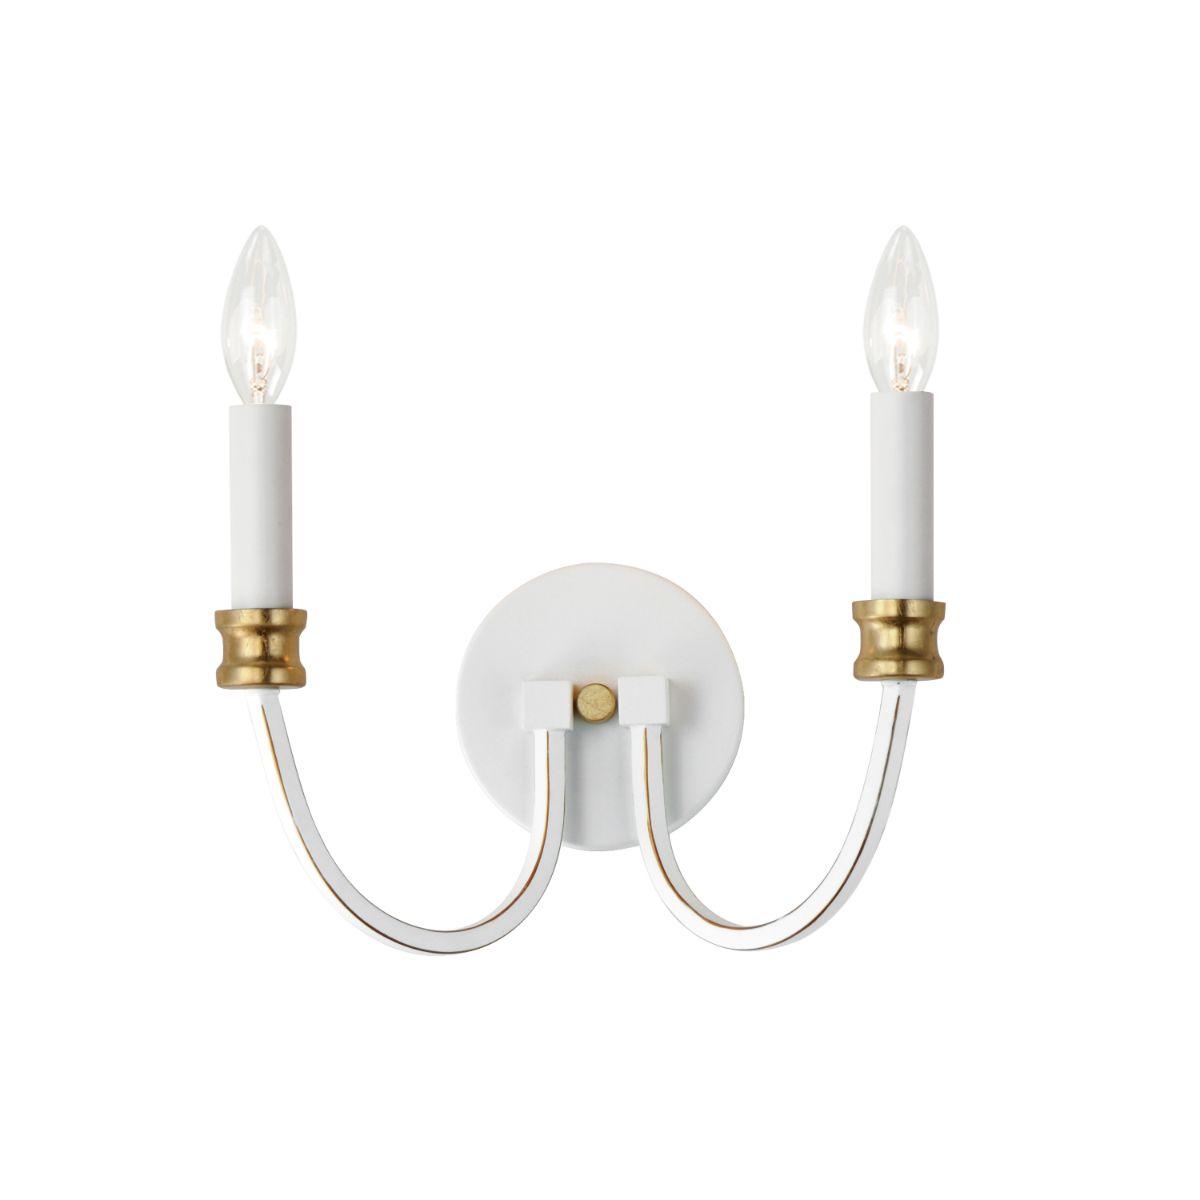 Charlton 12 in. 2 Lights Armed Sconce White & Gold Finish